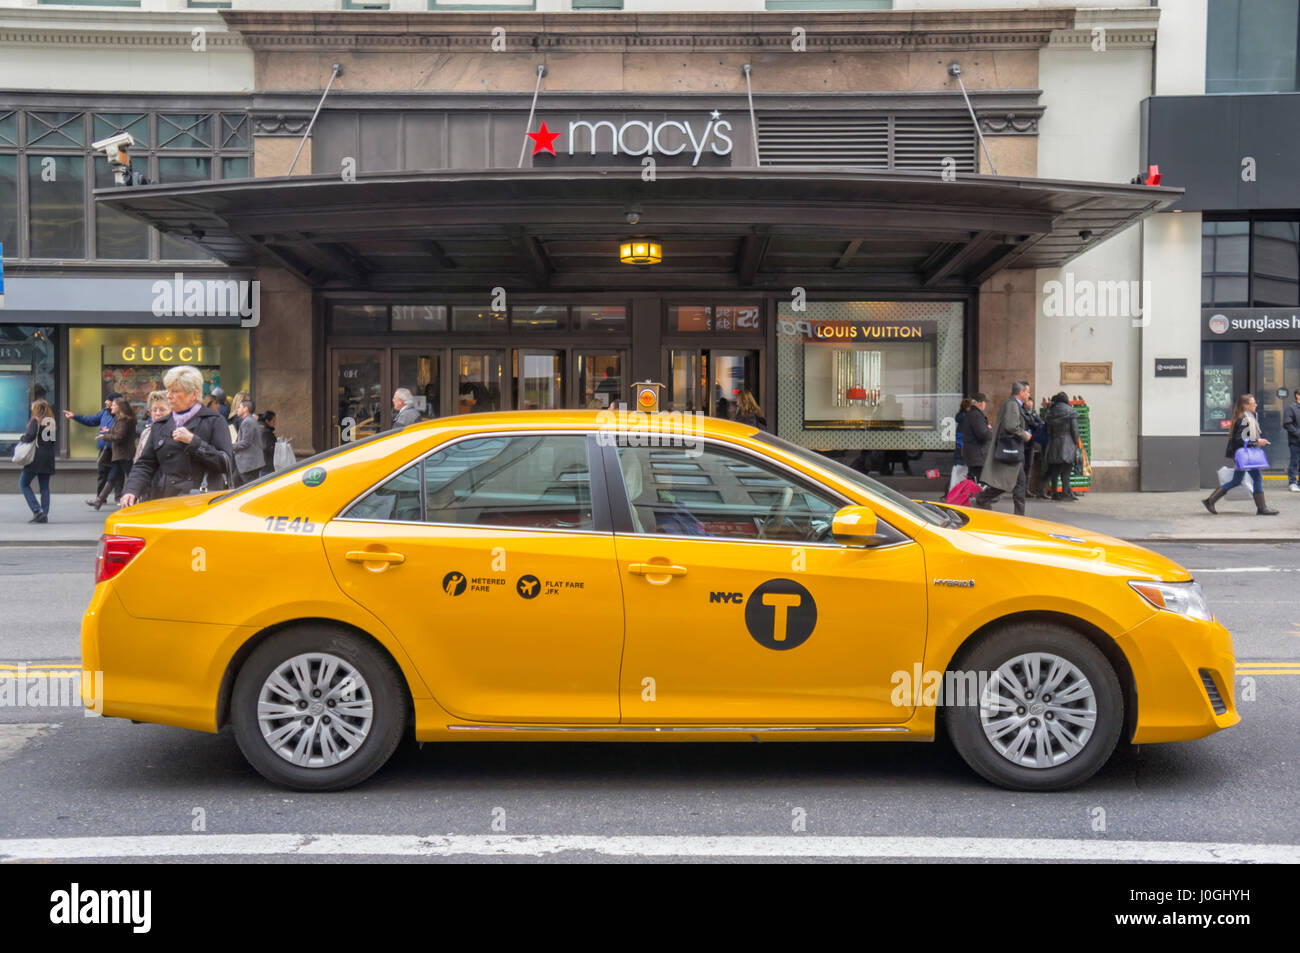 Macy's Department Store New York City with Iconic Yellow NYC Taxi (NY) Stock Photo